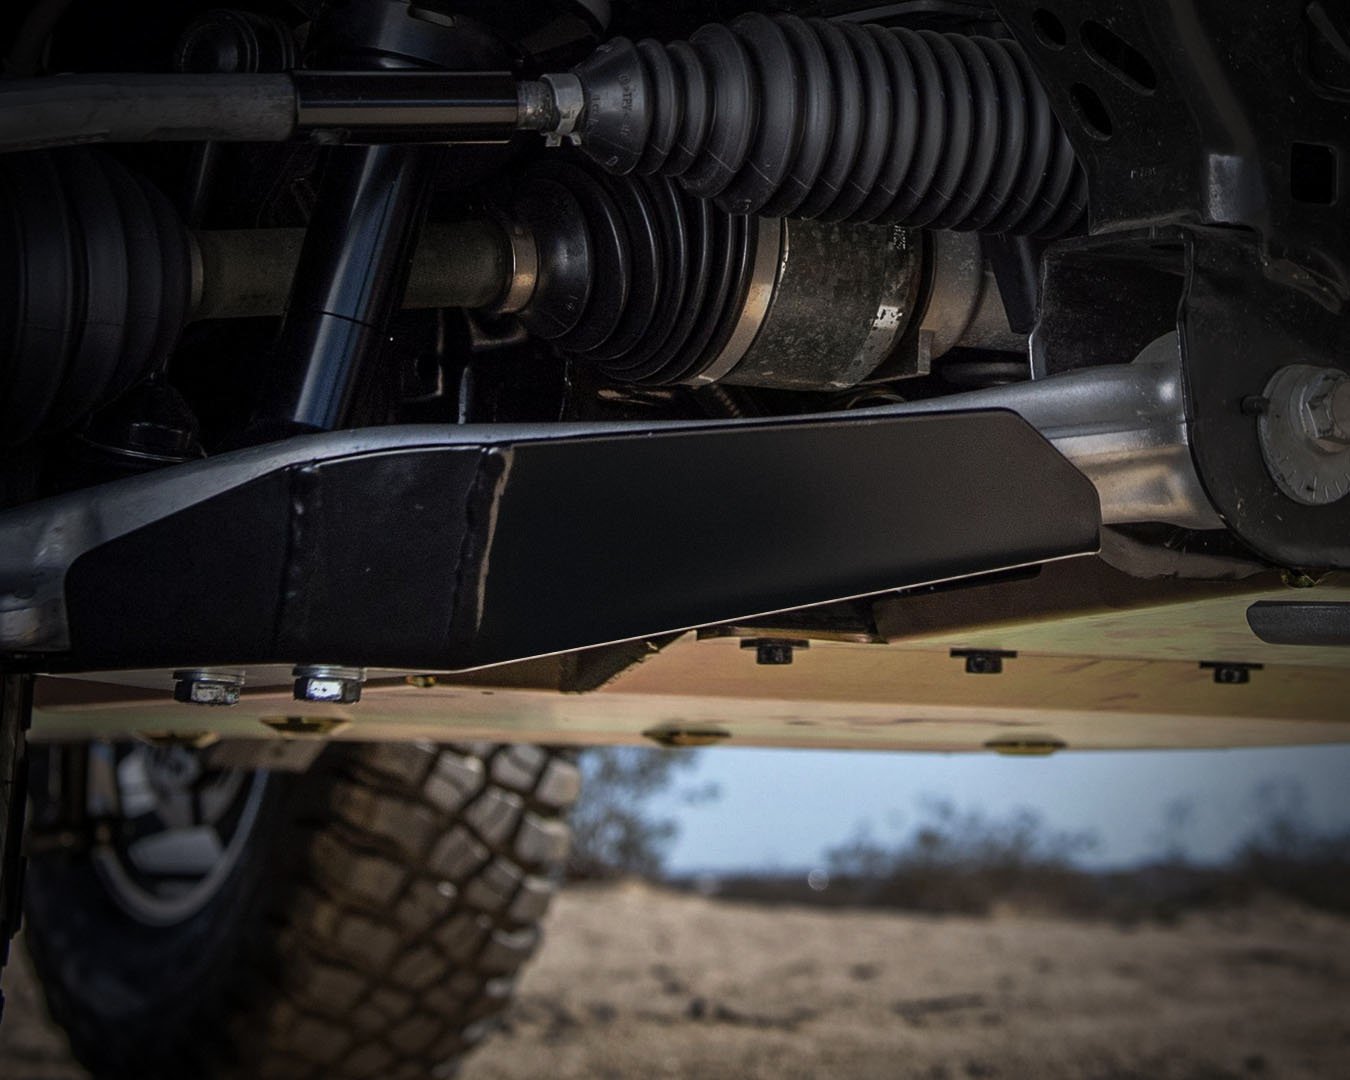 BDS Lower Control Arm Skid Plates on a KOH edition Bronco